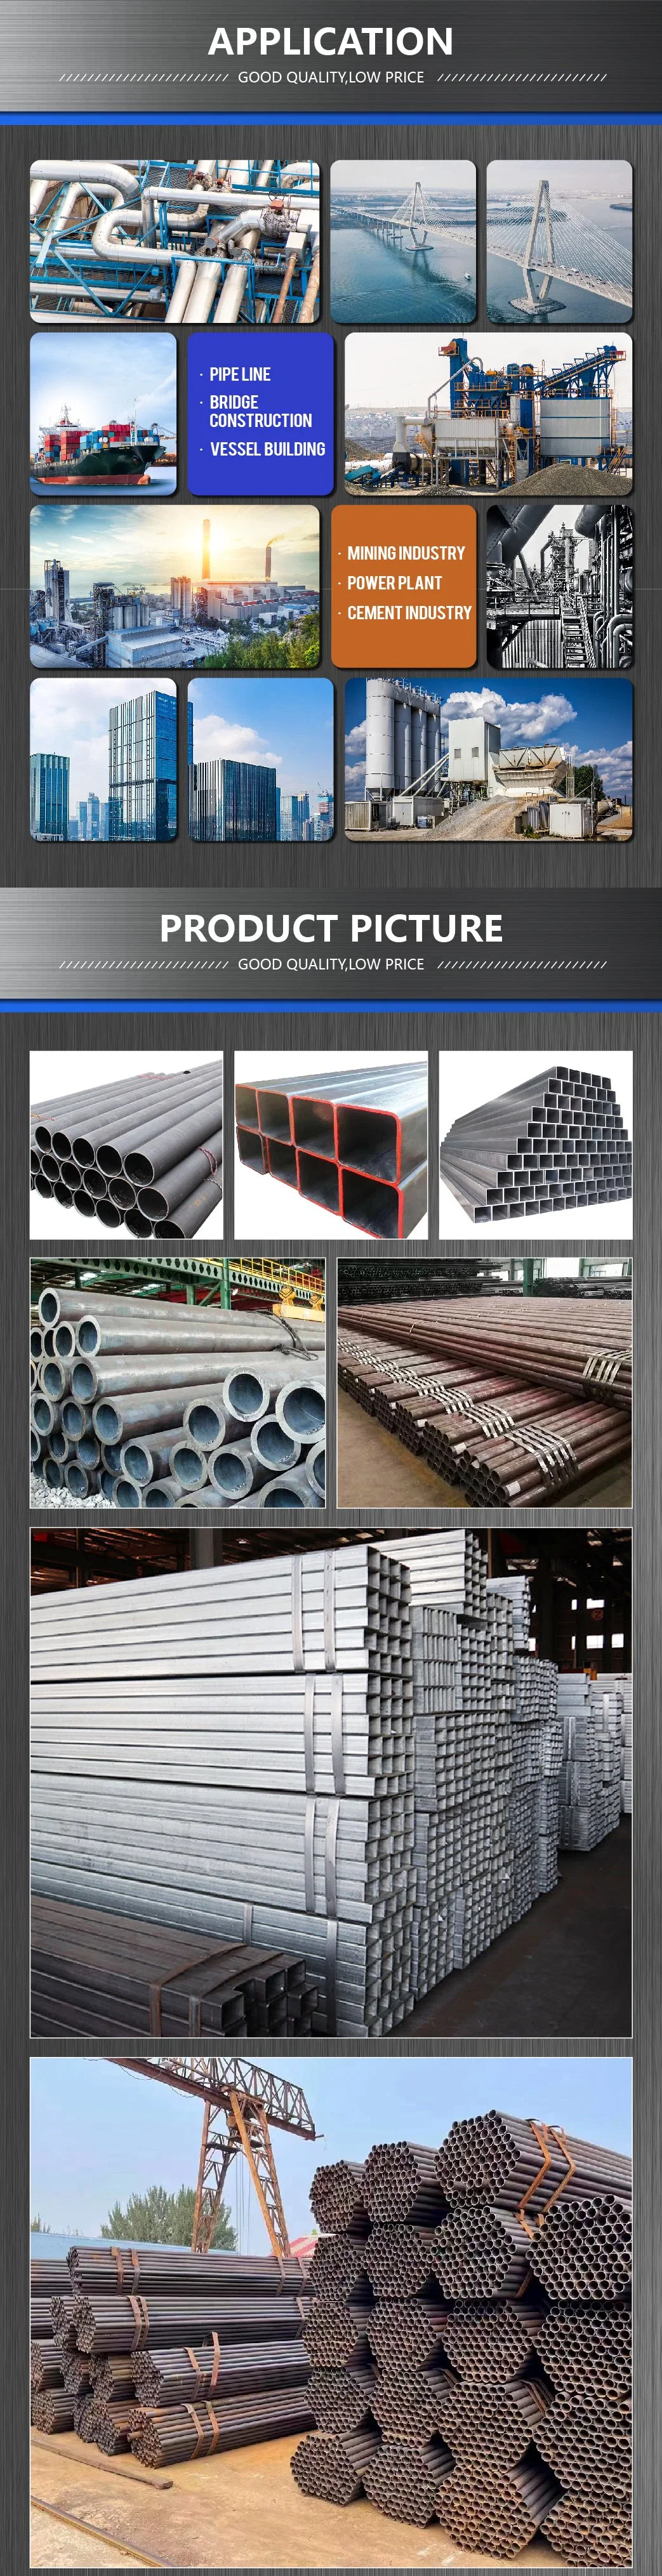 ERW Mild Steel Hot Rolled Black Welded Square Structural Hollow Section Shape Steel Pipe Tubing